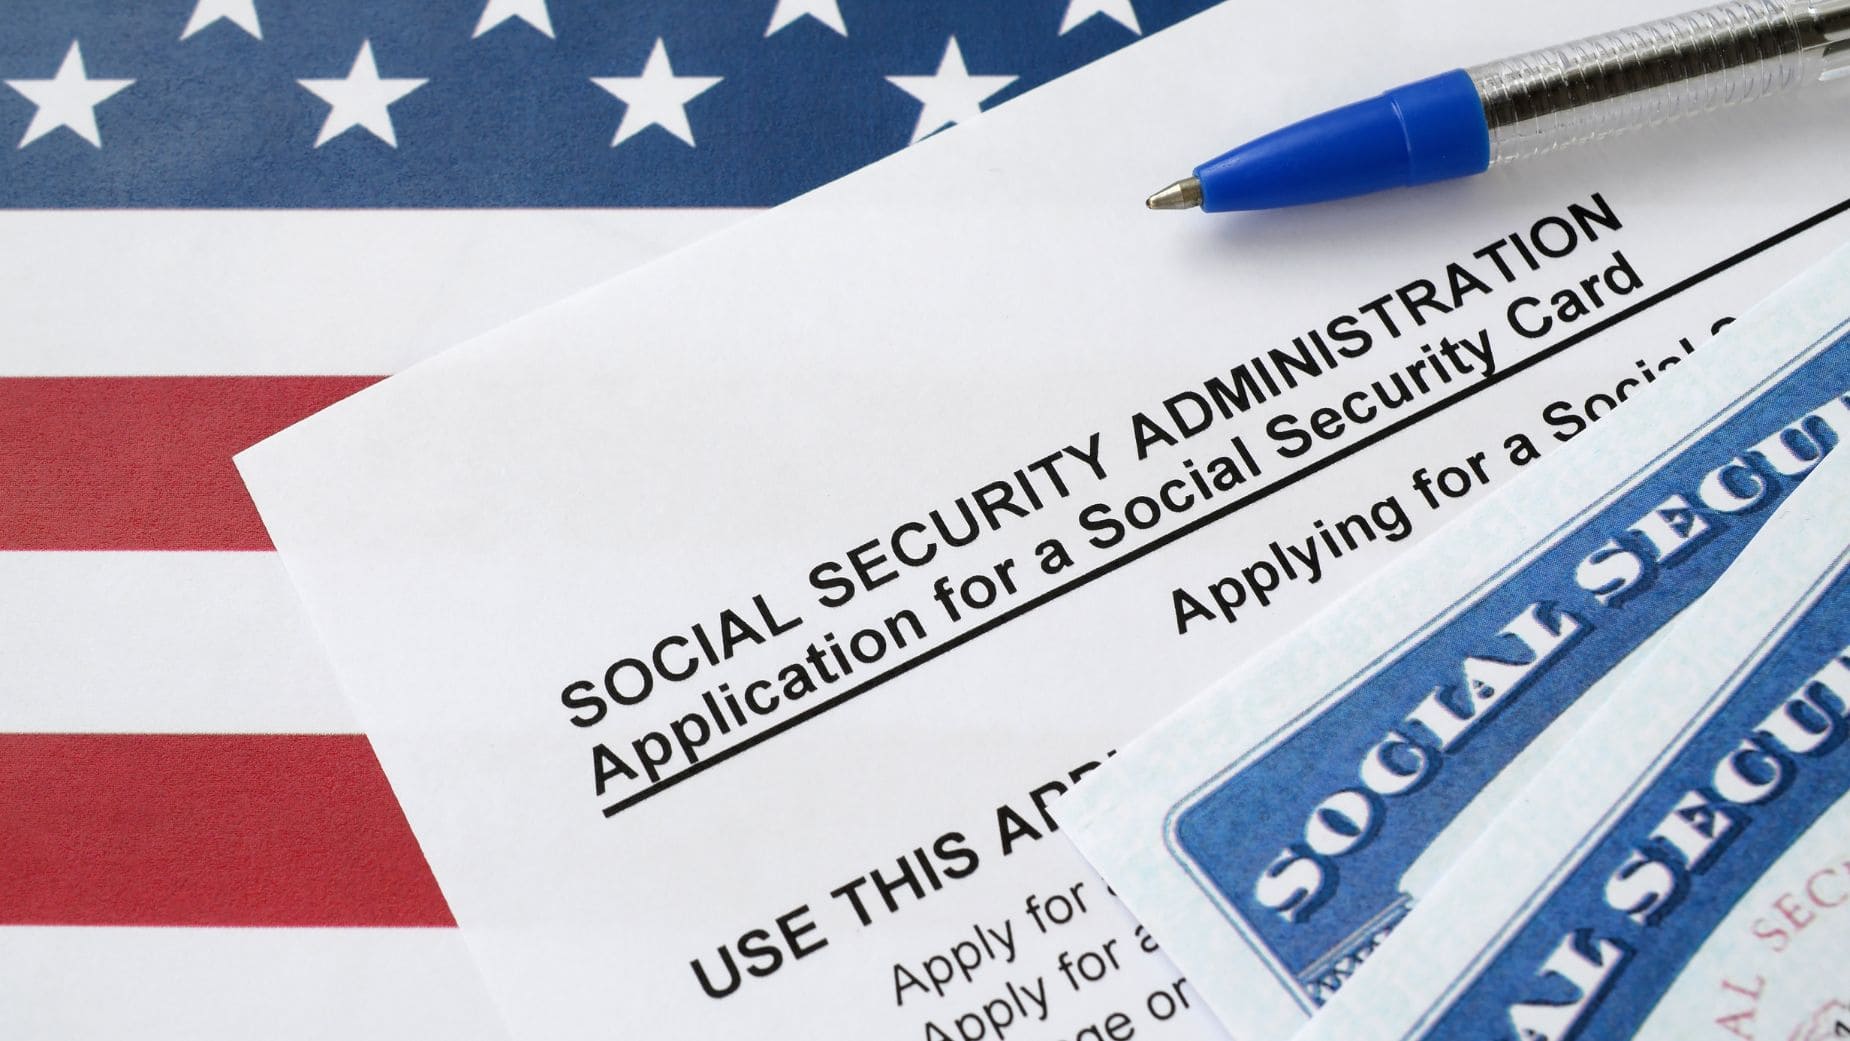 You can apply for some different Social Security benefits